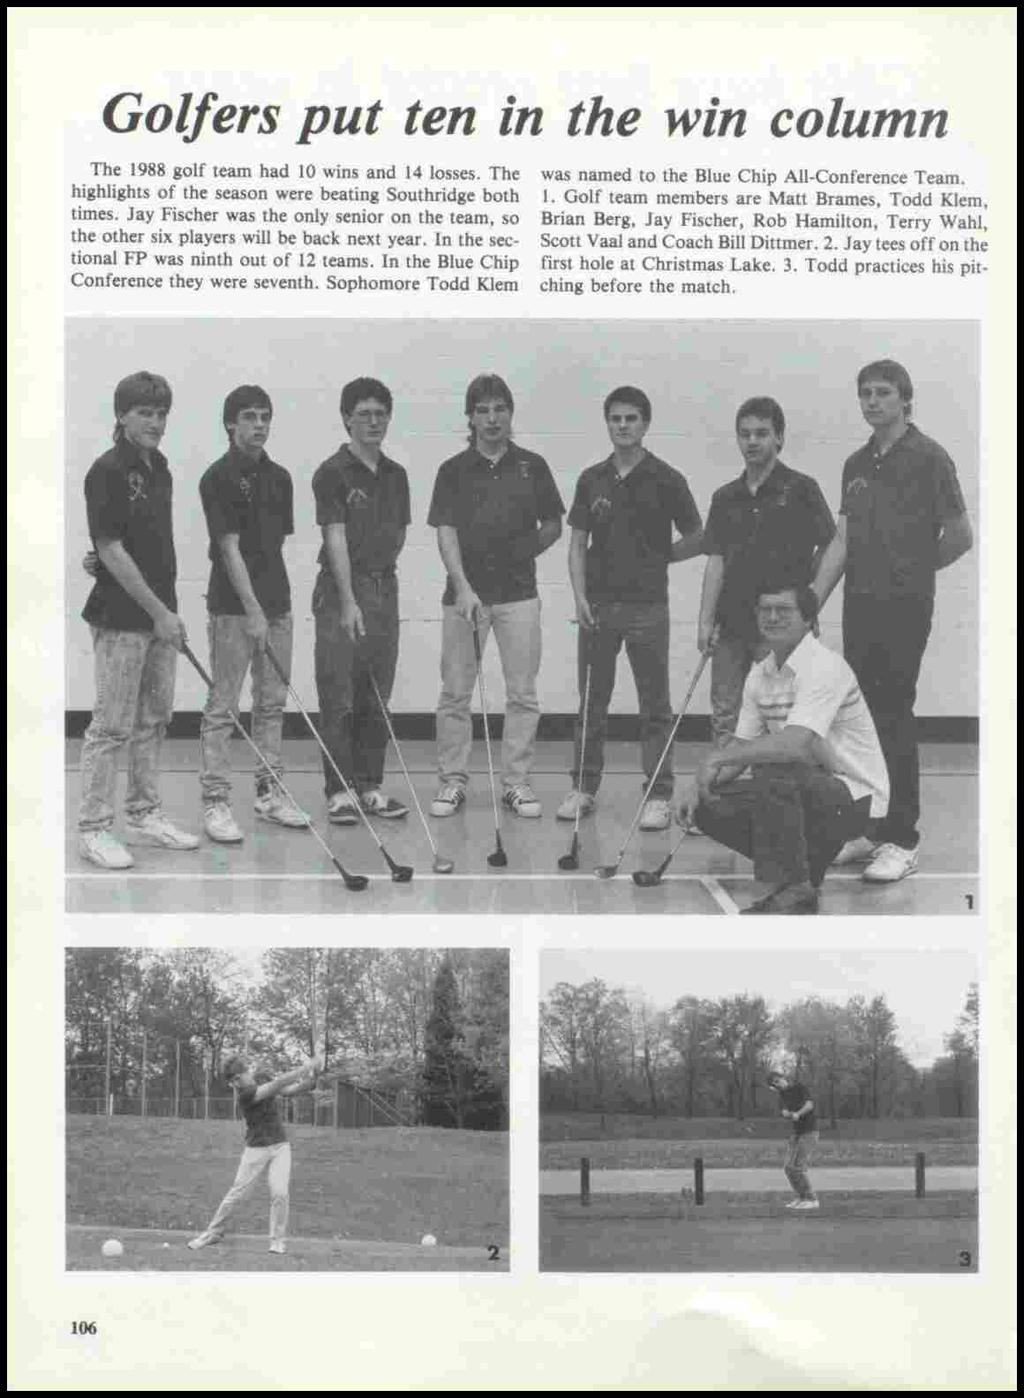 Golfers put ten in the win column The 1988 golf team had 10 wins and 14 losses. The highlights of the season were beating Southridge both times.